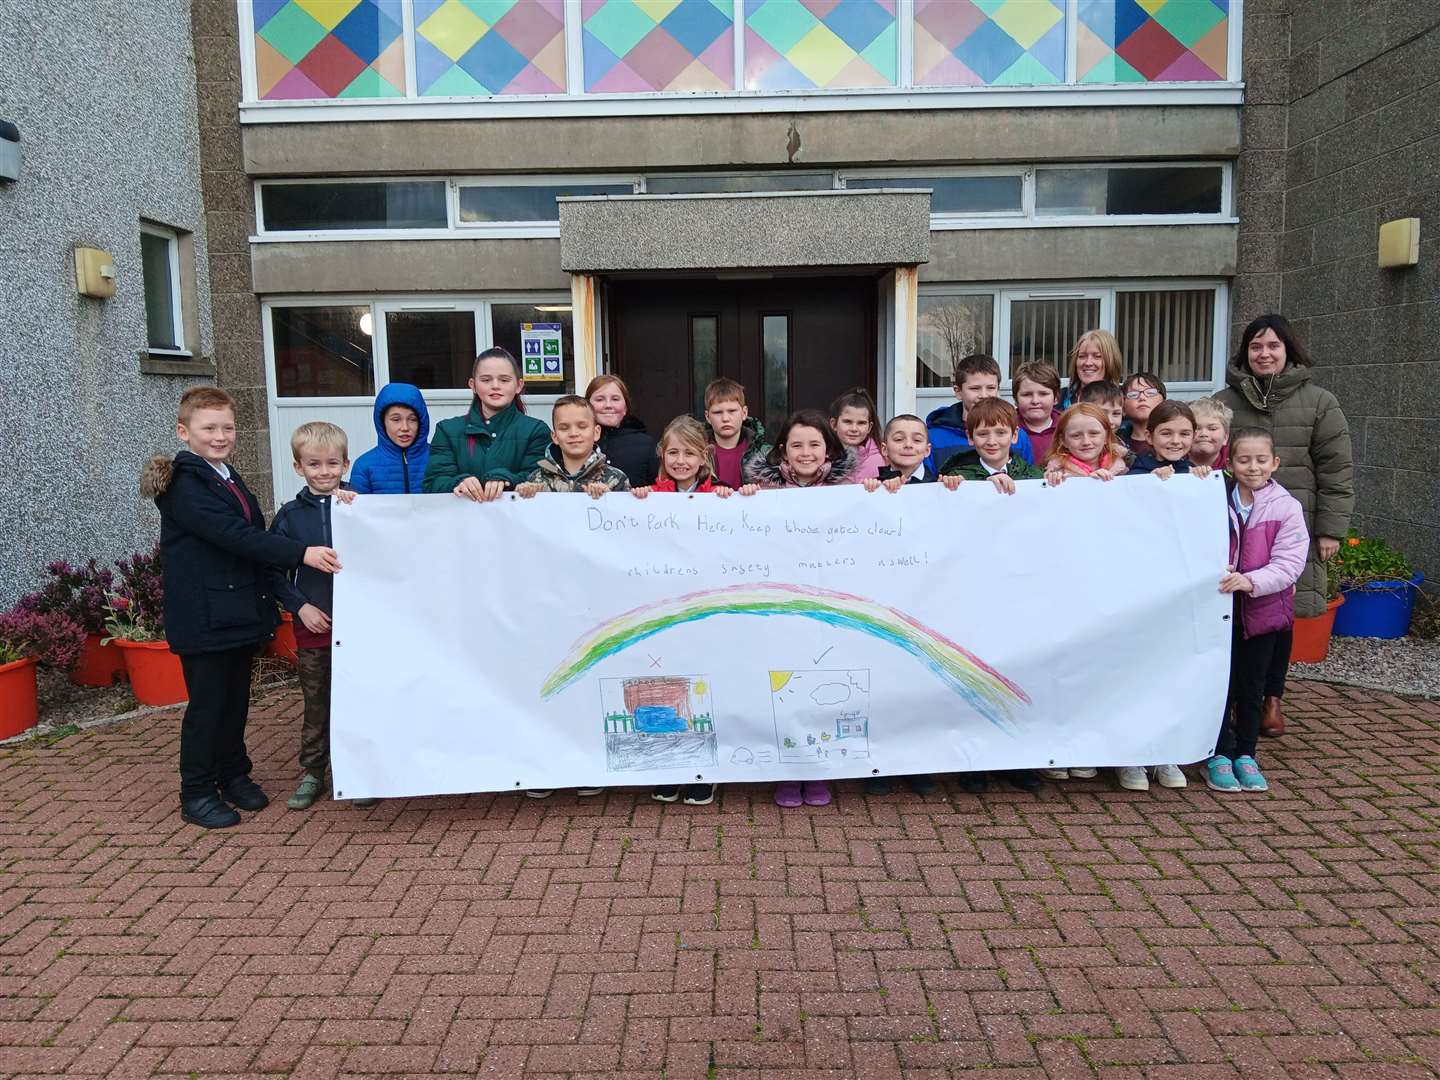 The school's road safety committee, which comprises p5 and p6 pupils, have designed a road safety banner.